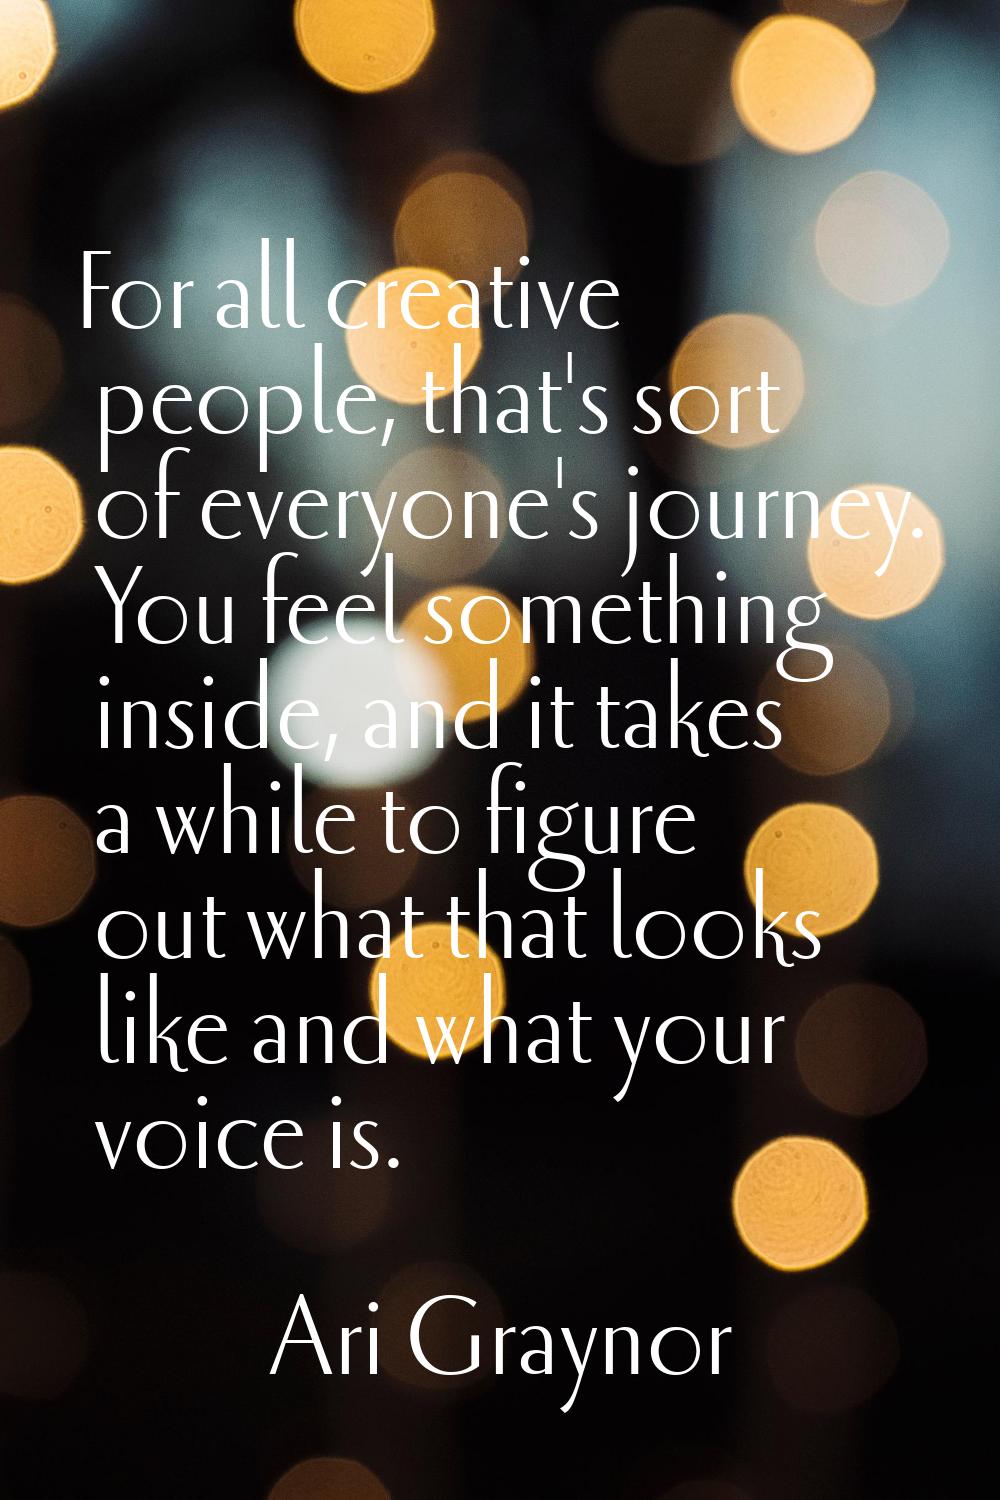 For all creative people, that's sort of everyone's journey. You feel something inside, and it takes